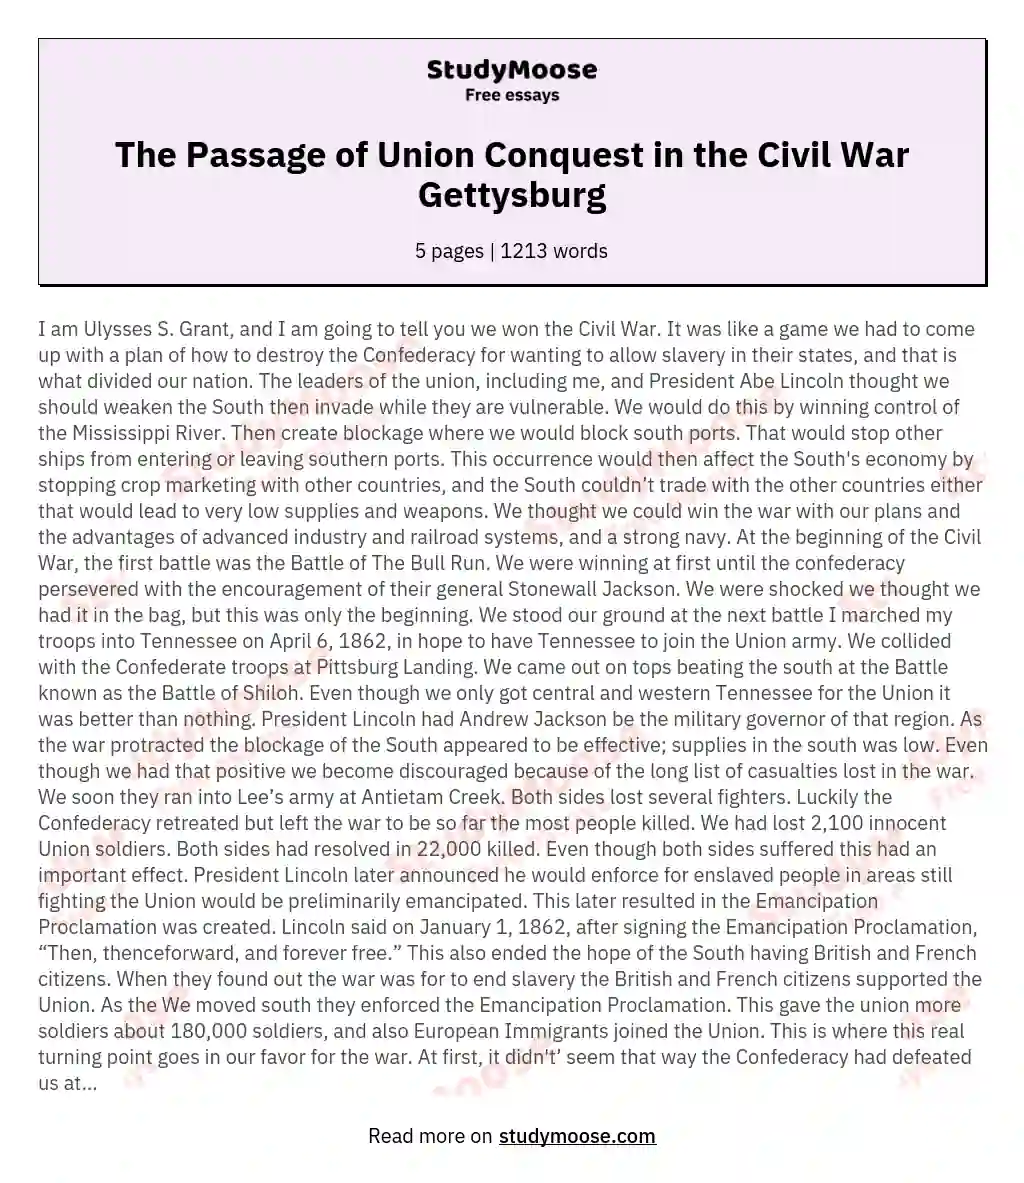 The Passage of Union Conquest in the Civil War Gettysburg essay